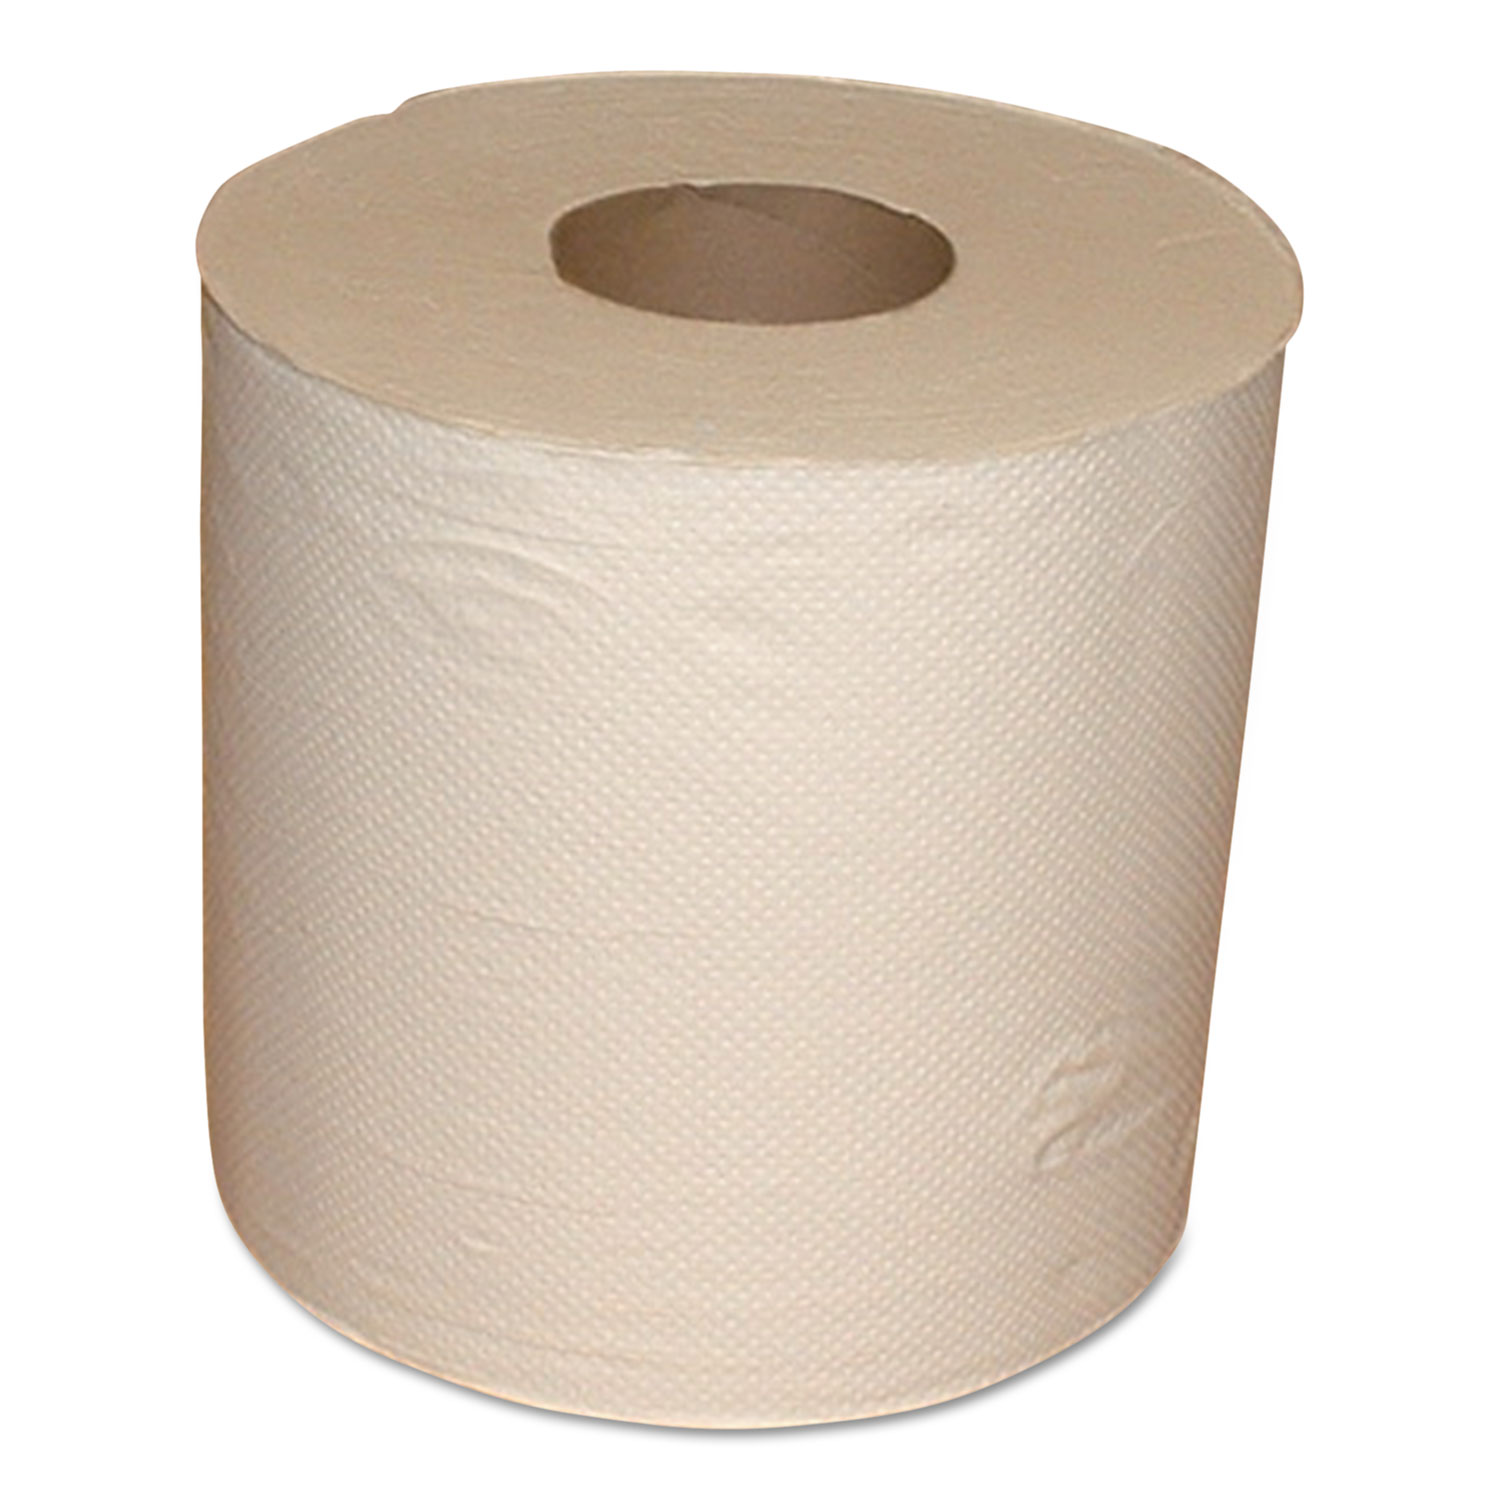 Center-Pull Roll Towels, 2-Ply, 7.875